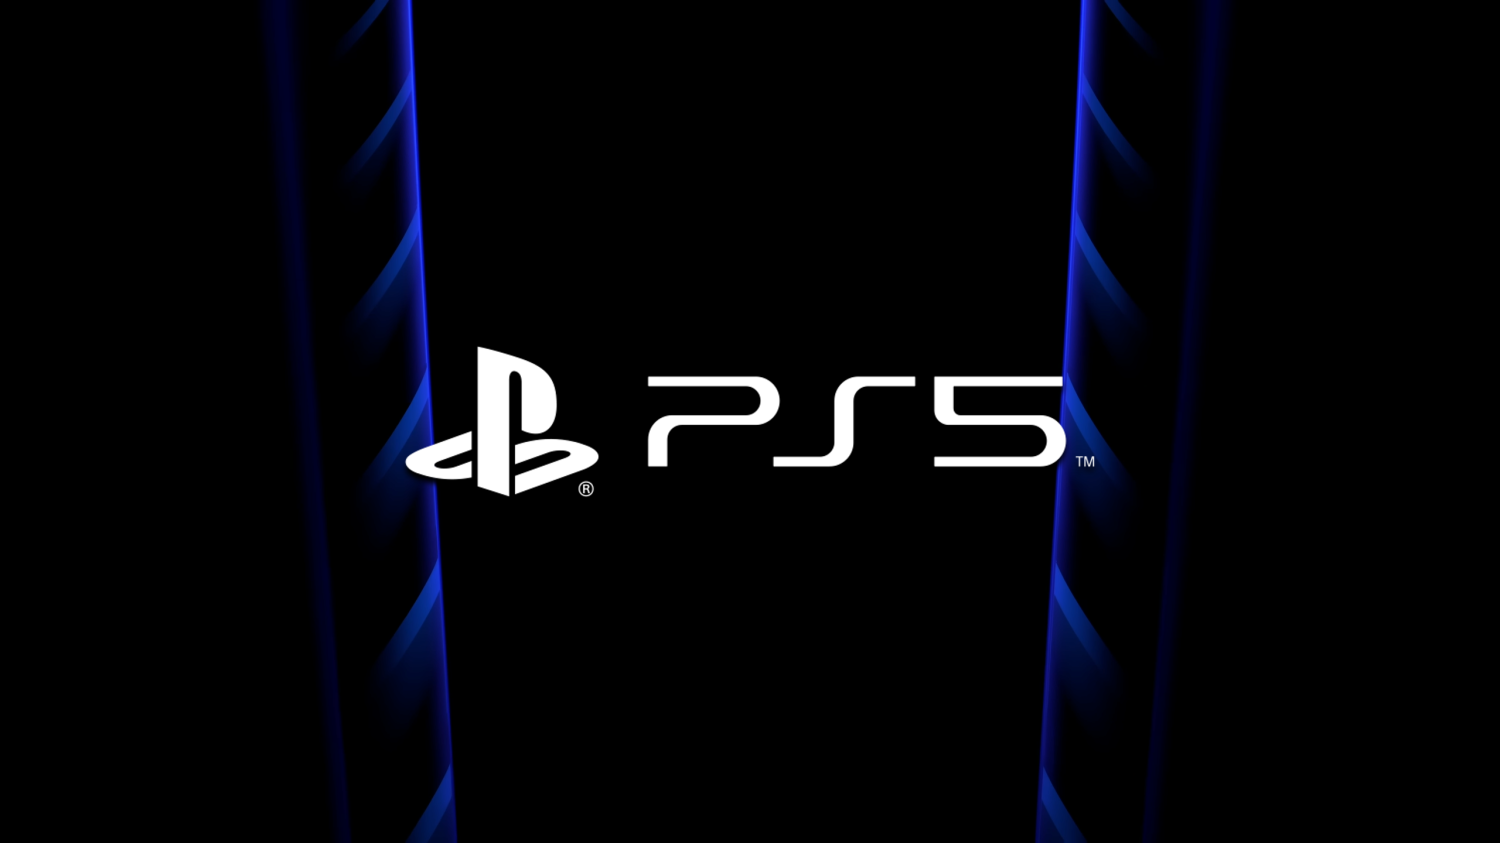 PlayStation 5 Pro could launch in 2023, Sony executive hints - Mirror